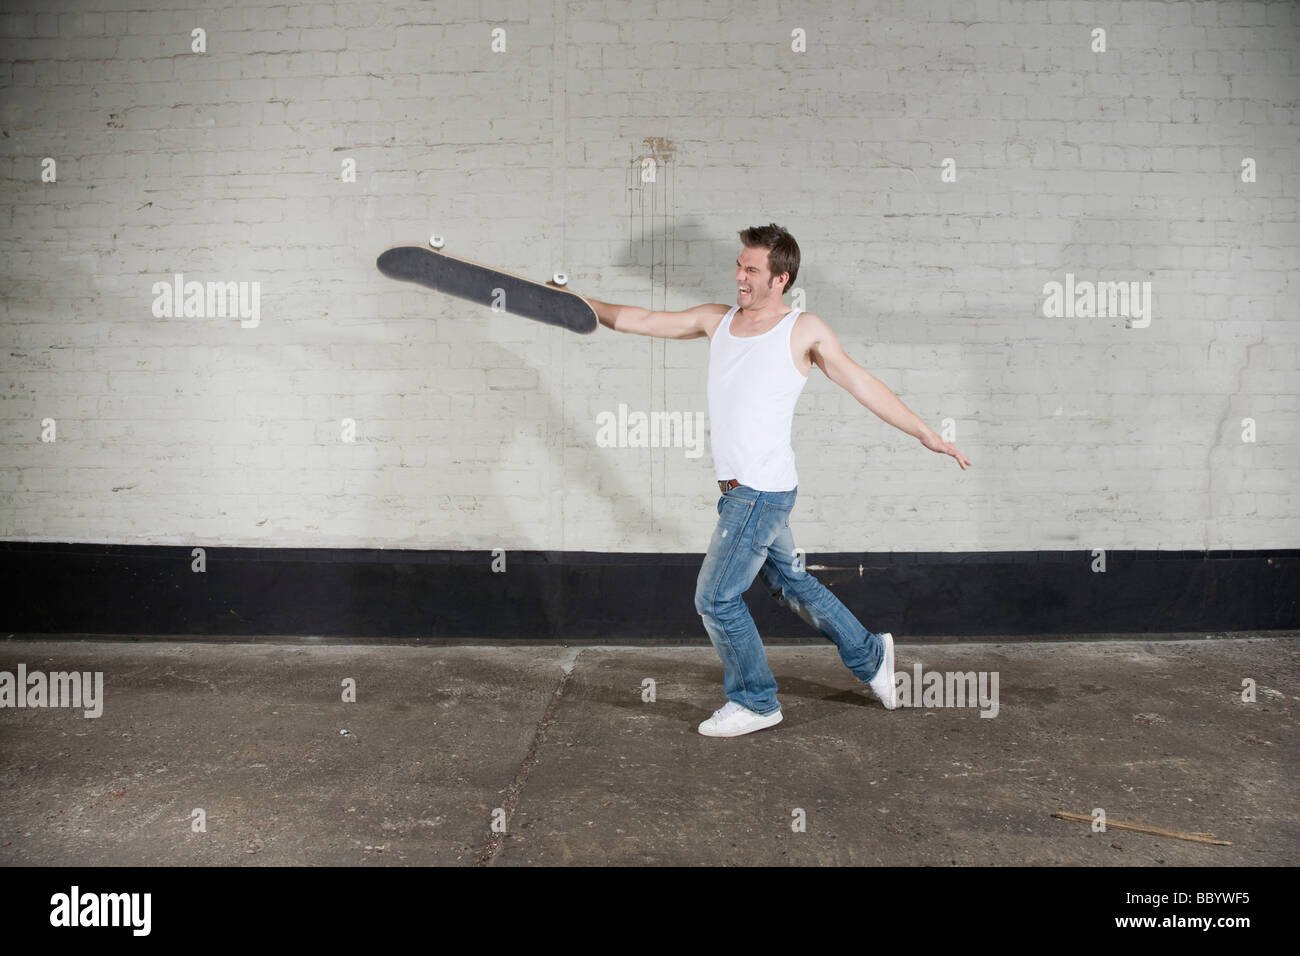 Angry skateboarder chucking his board Stock Photo